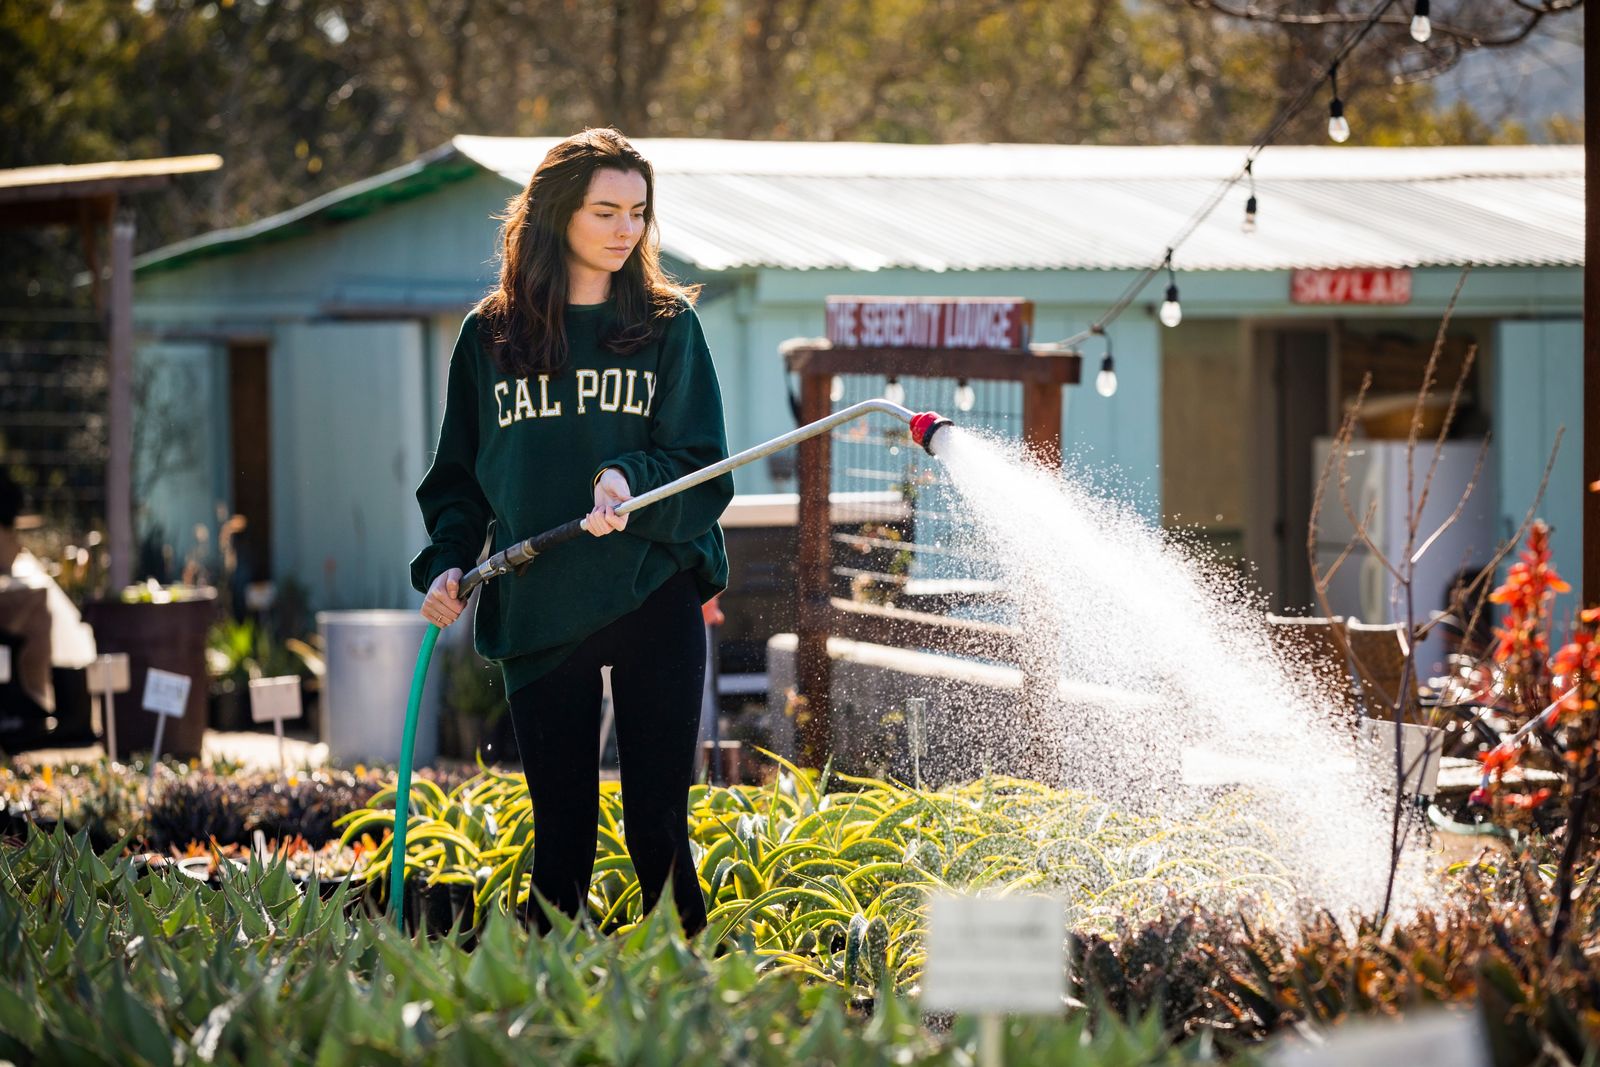 Growing Grounds frequently serves as a service-learning site for Cal Poly students.